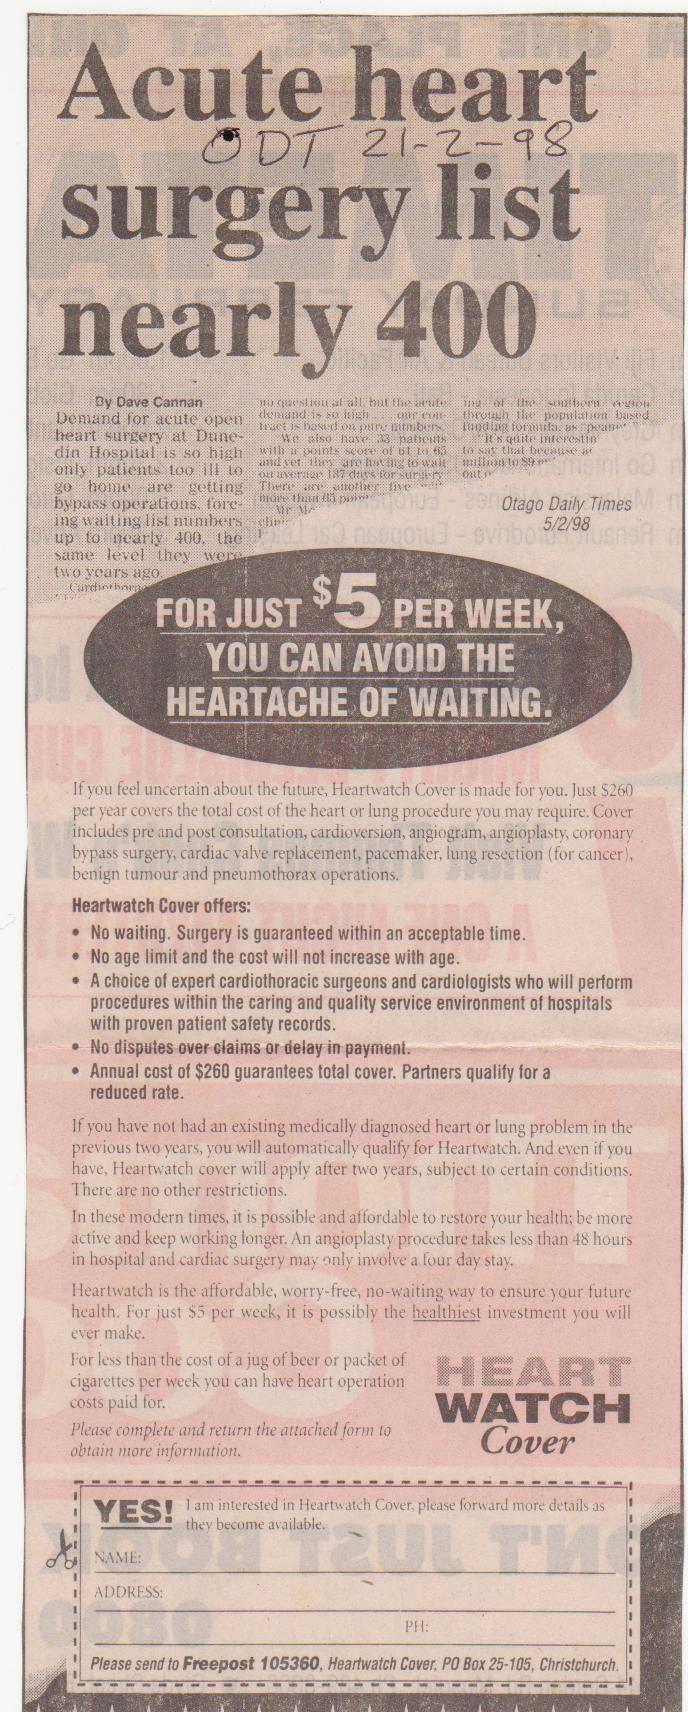 heartwatch-insurance-cover-advertisement-otago-daily-times-21-february-1998